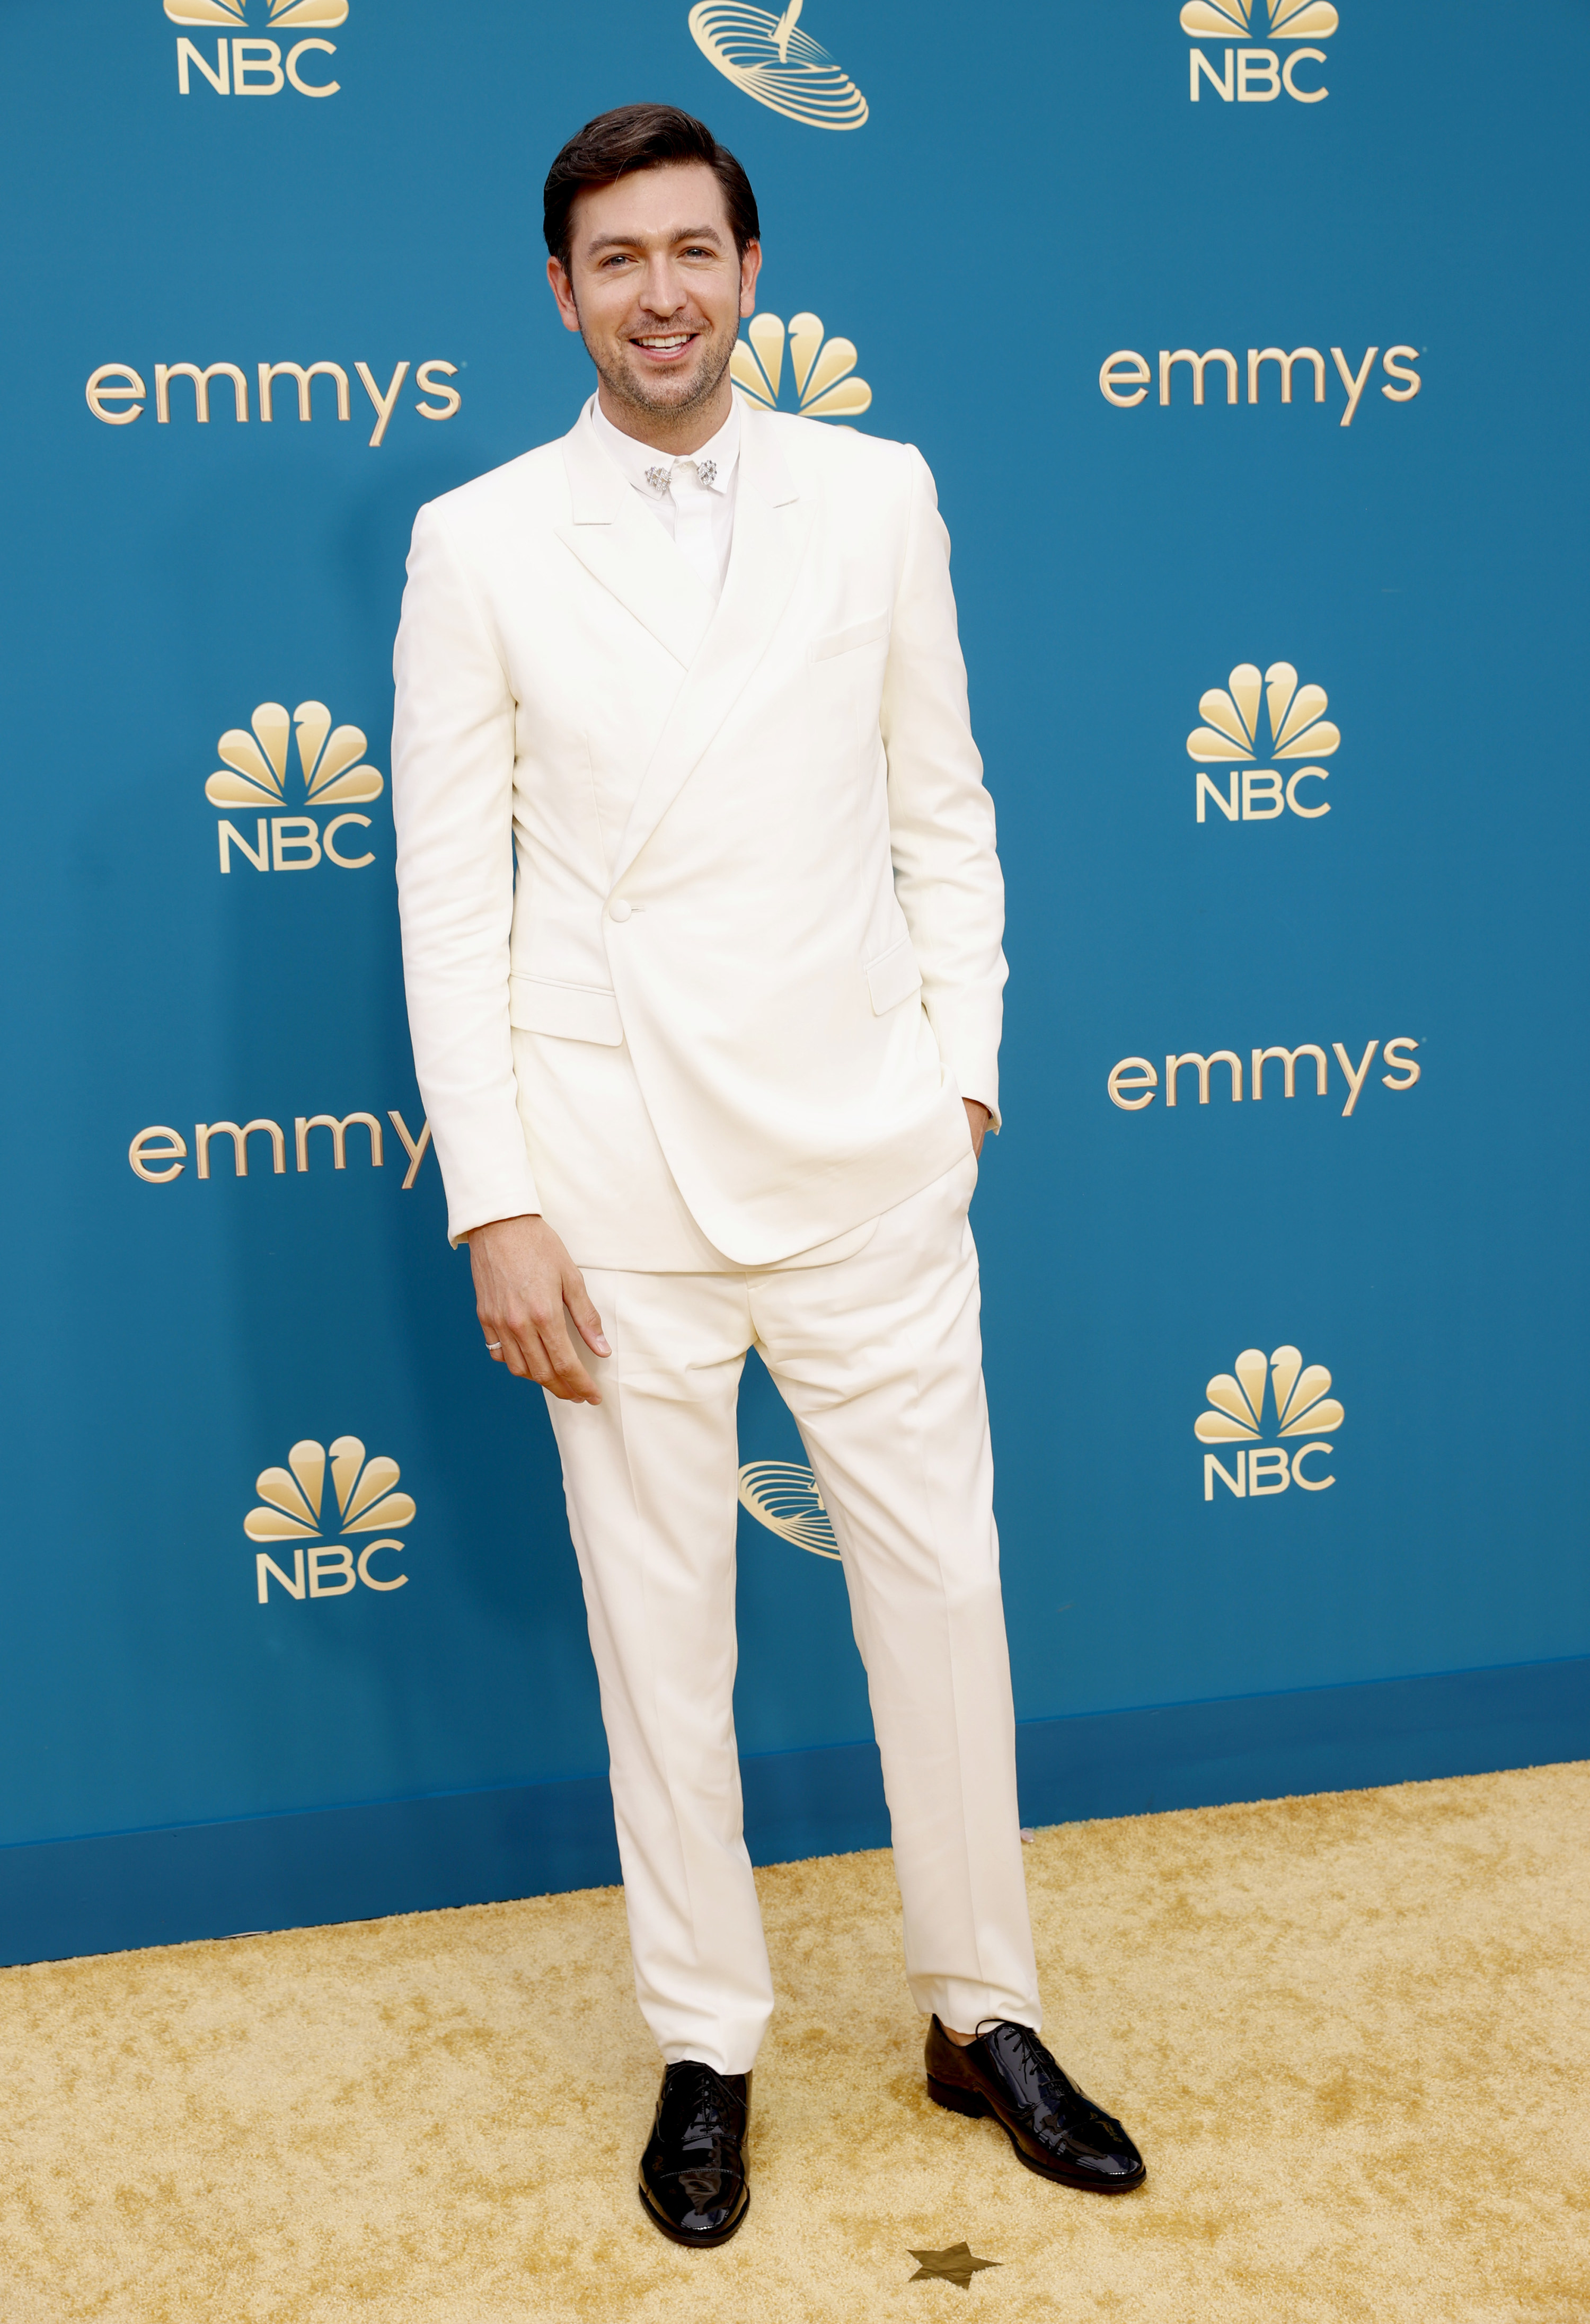 wearing an all-white suit